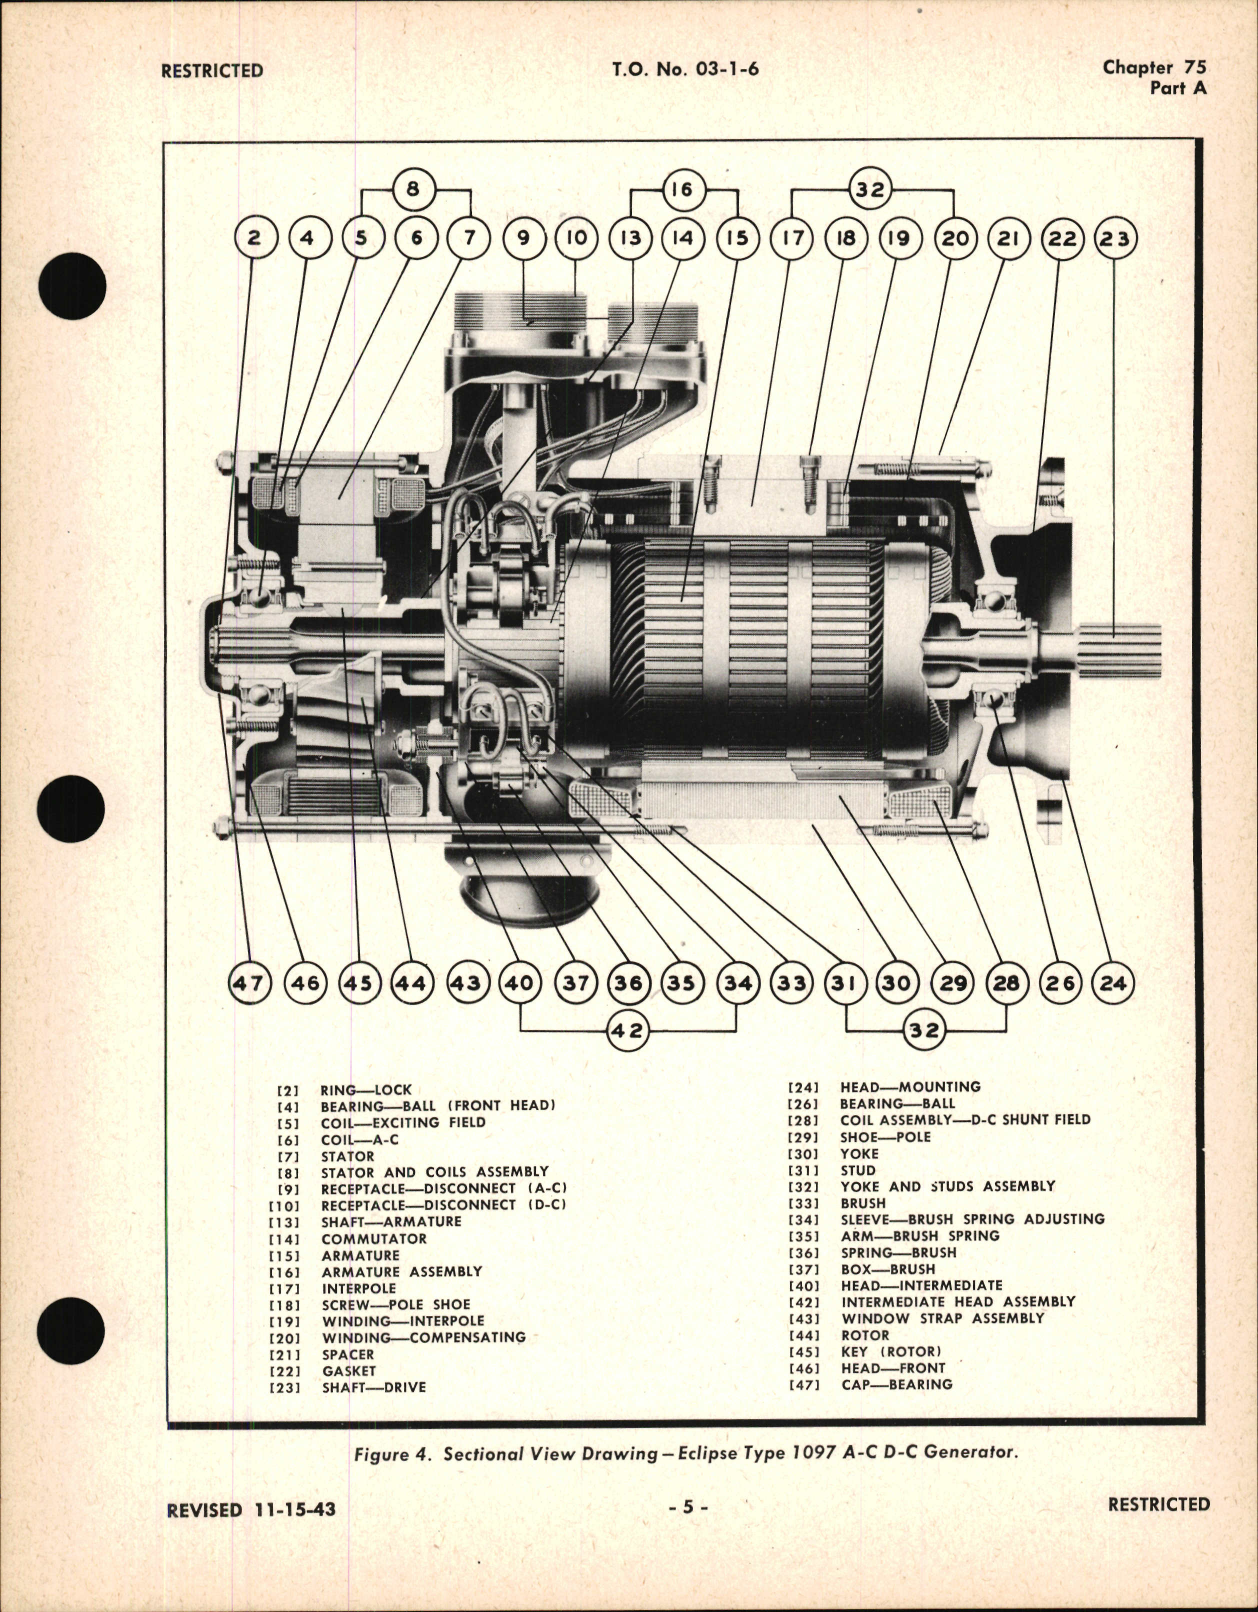 Sample page 5 from AirCorps Library document: Operating and Service Instructions for A-C D-C Generator, Ch 75 Part A